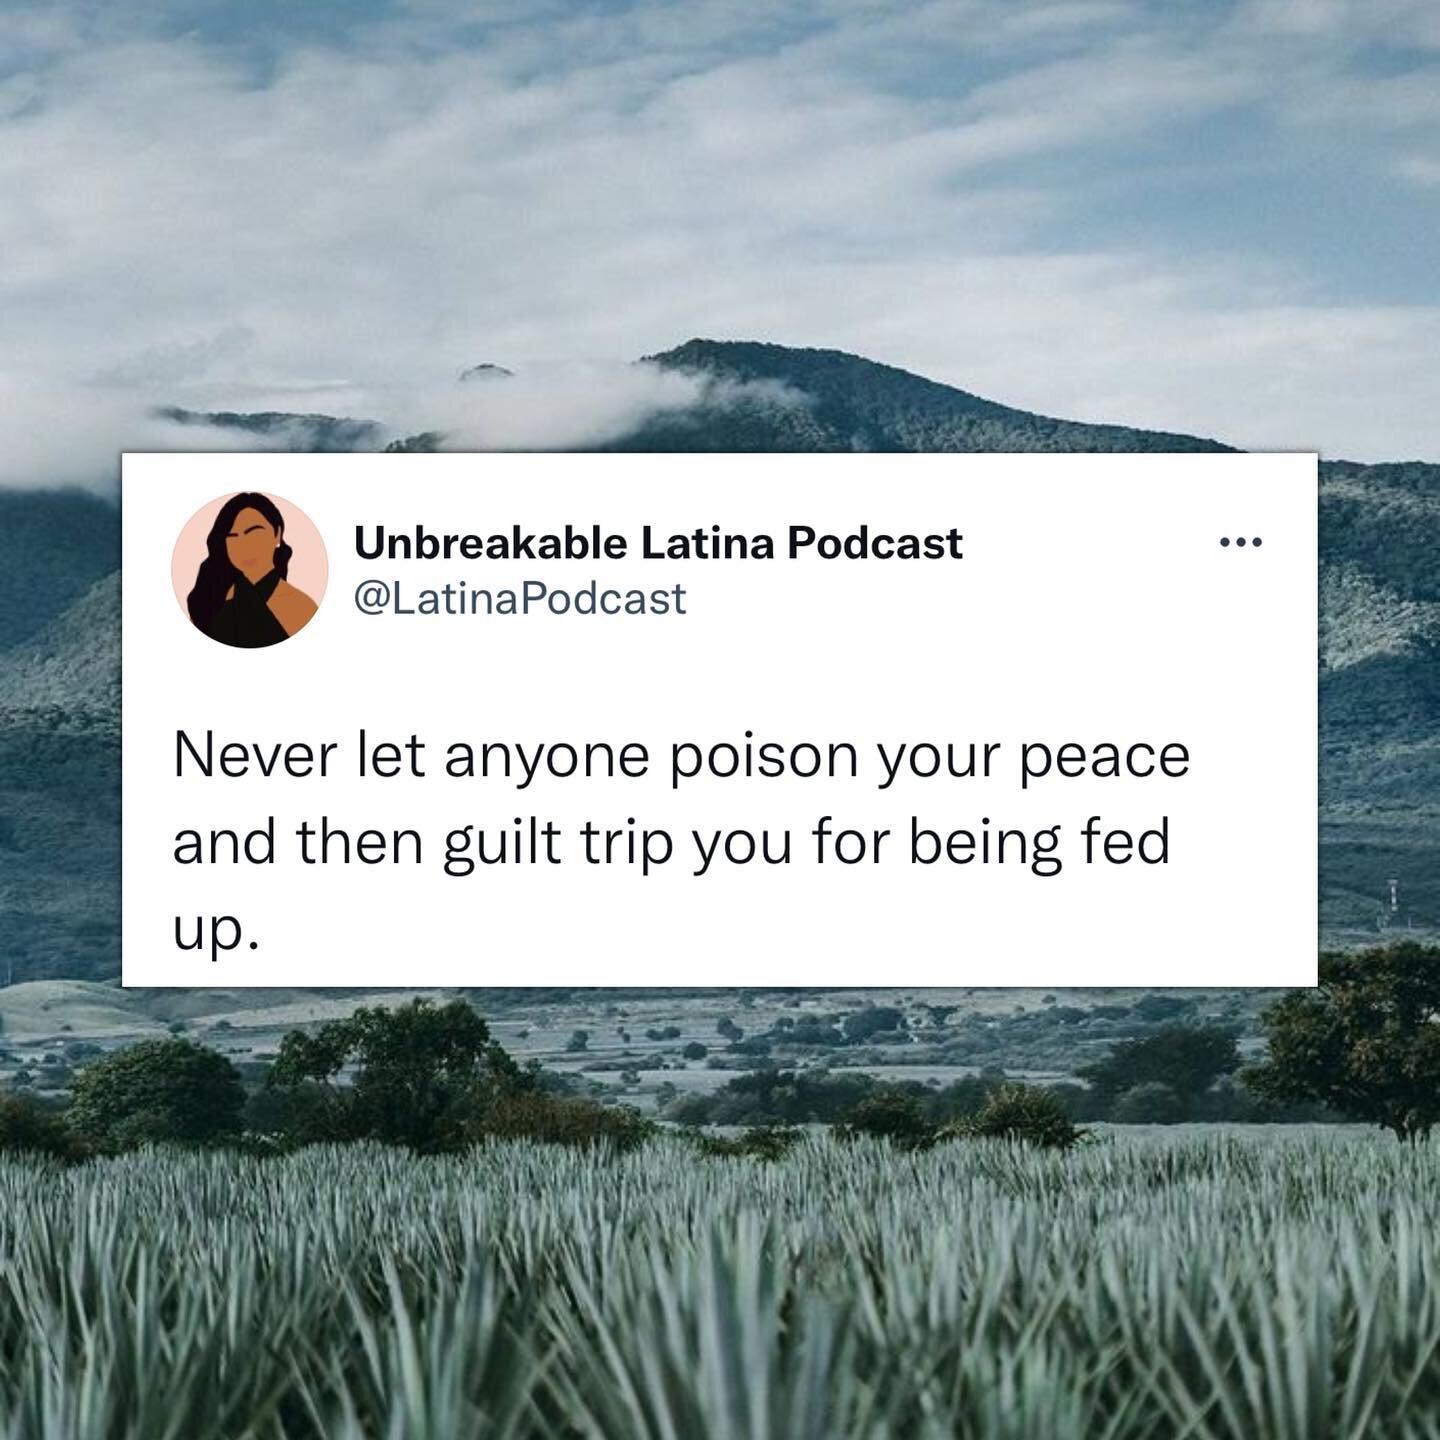 🤍
-
-
-
#unbreakablelatinapodcast #latinapodcaster #latinapodcasts #podcaster #latinacontentcreators #latinapodcasters #latinacreator #latinaswhopodcast #podcaster #anchorfm #spotifypodcast #applepodcasts #protectyourpeace #guilttrip